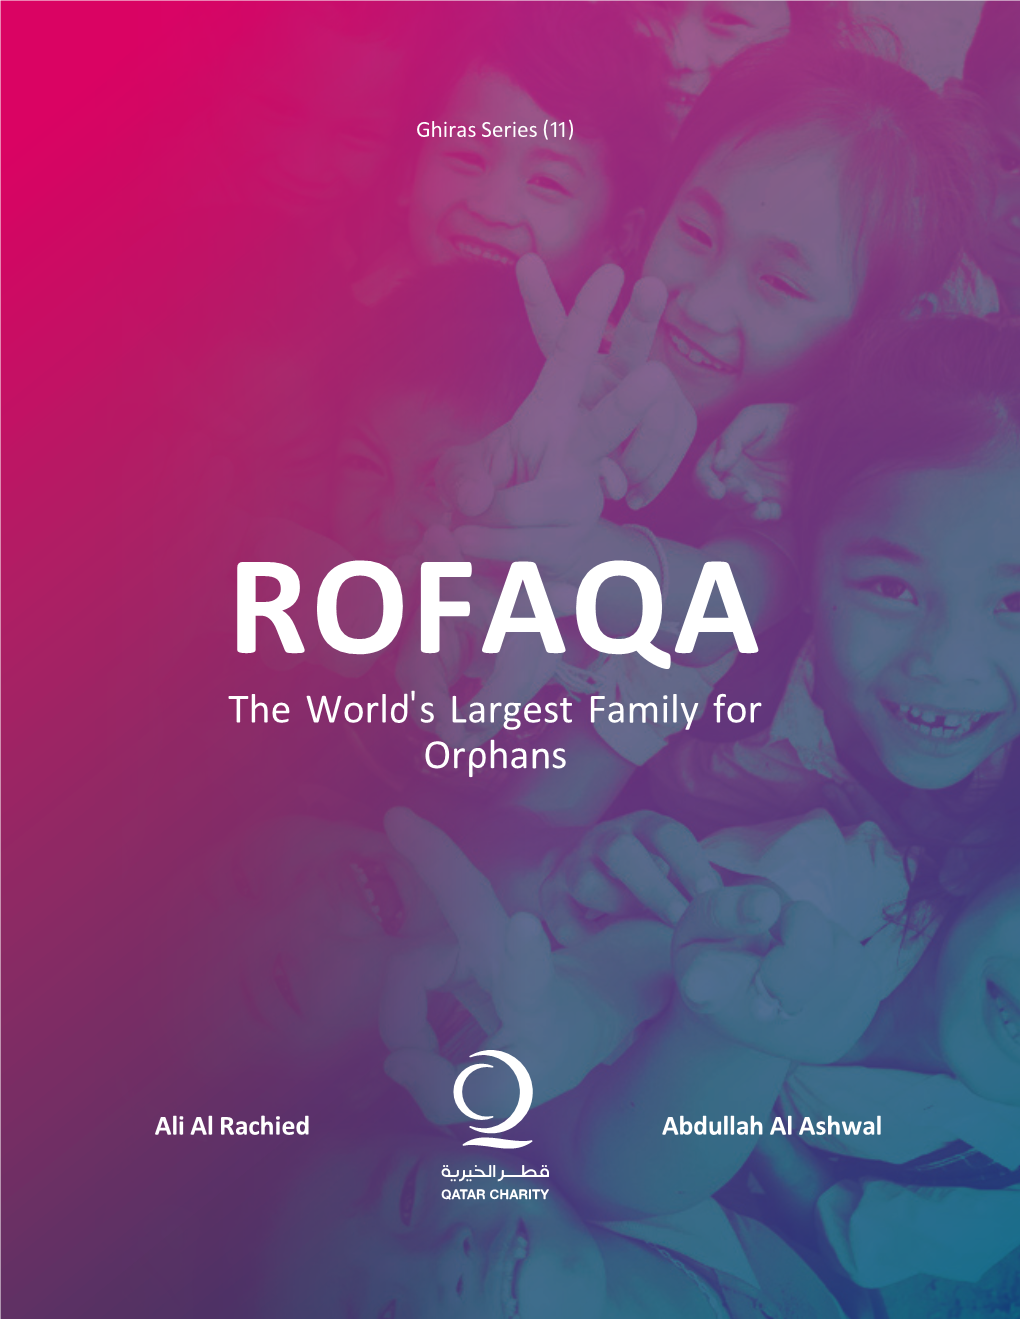 ROFAQA the World's Largest Family for Orphans